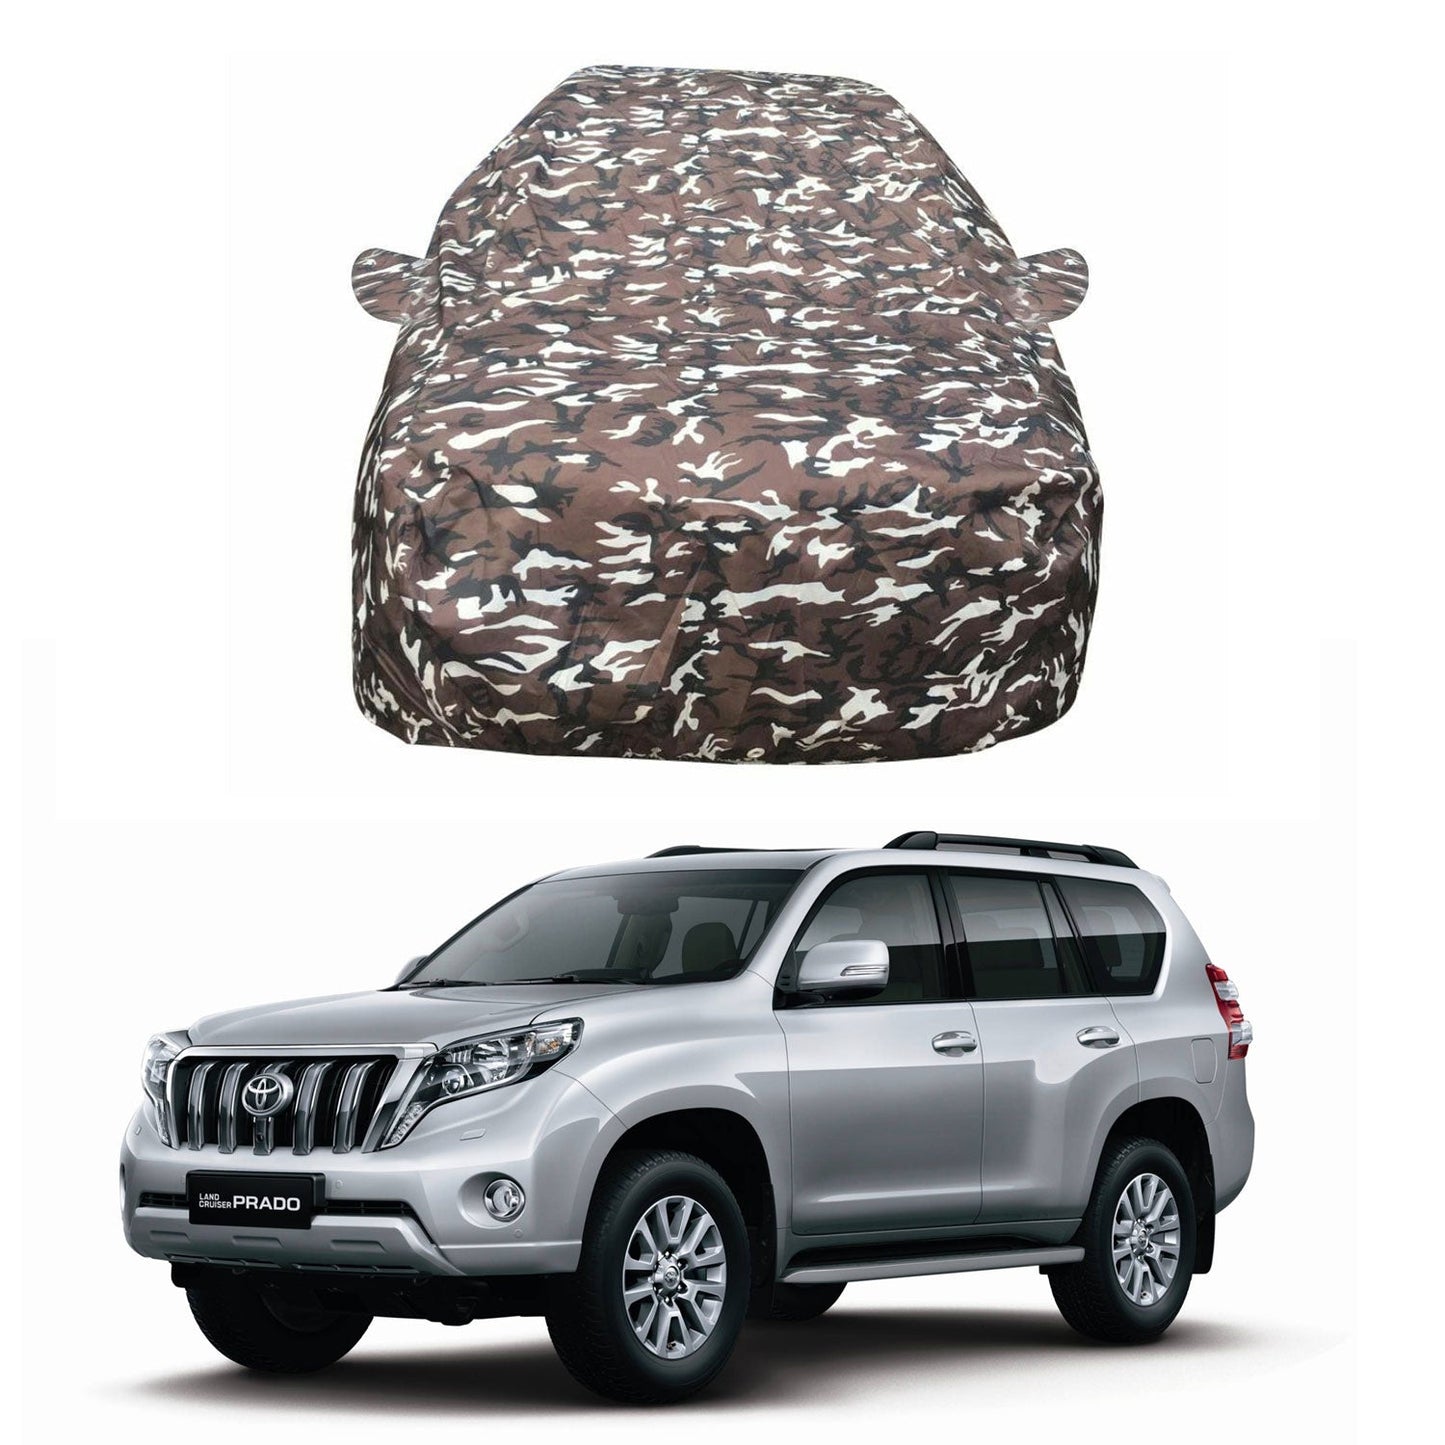 Oshotto Ranger Design Made of 100% Waterproof Fabric Multicolor Car Body Cover with Mirror Pockets For Toyota Land Cruiser Prado